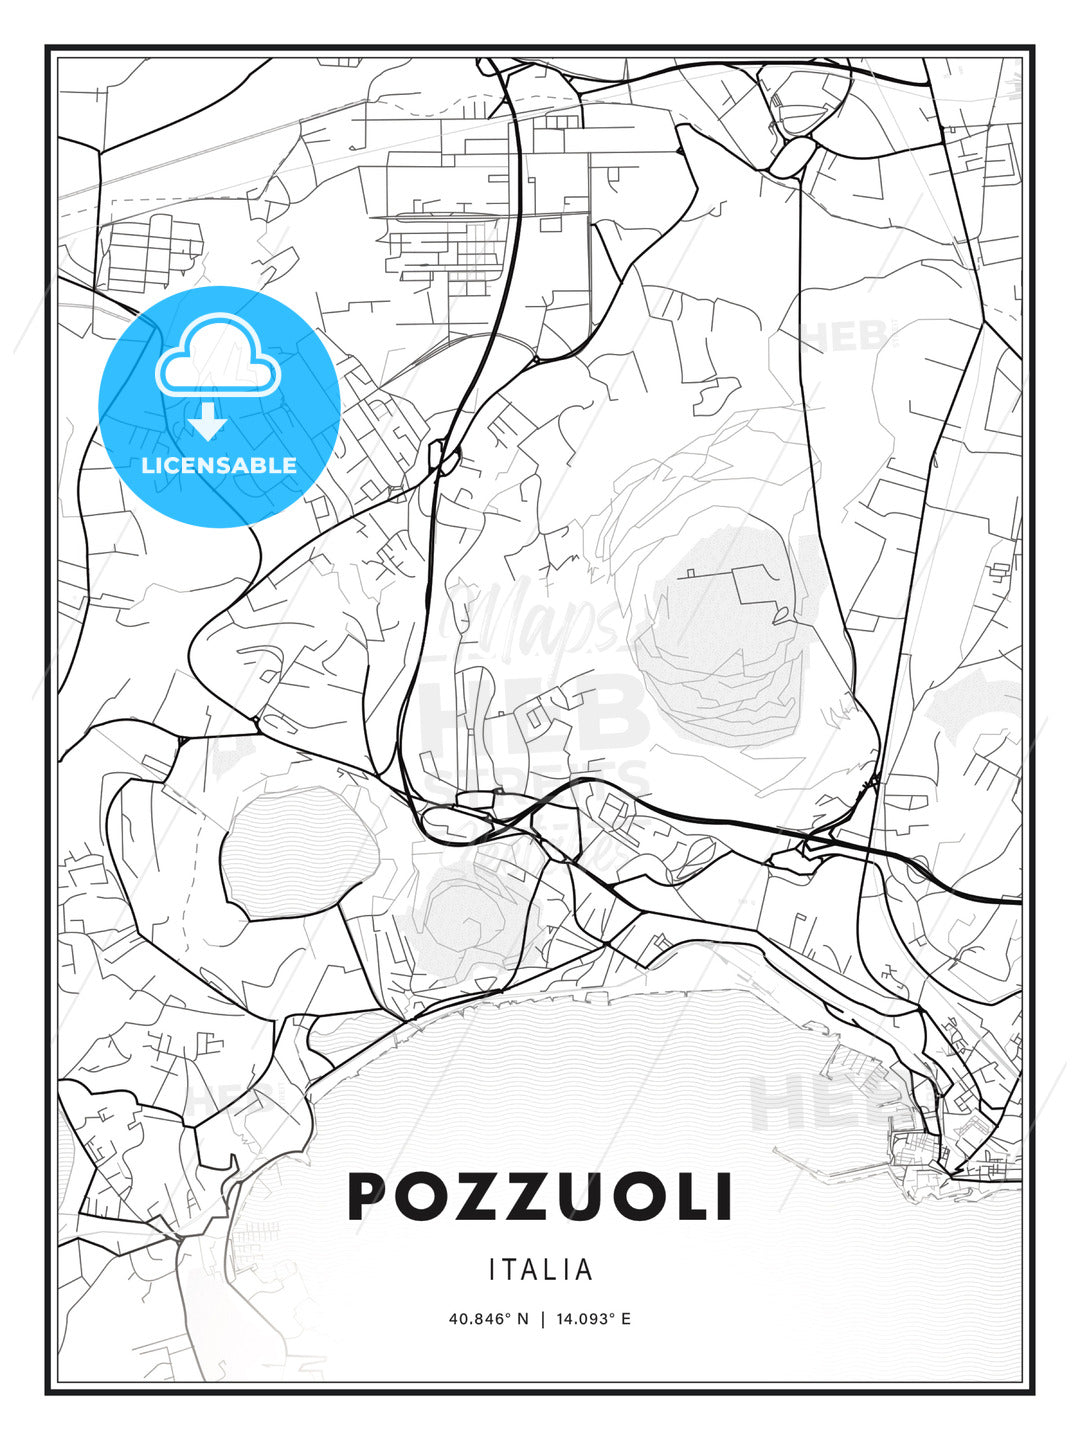 Pozzuoli, Italy, Modern Print Template in Various Formats - HEBSTREITS Sketches